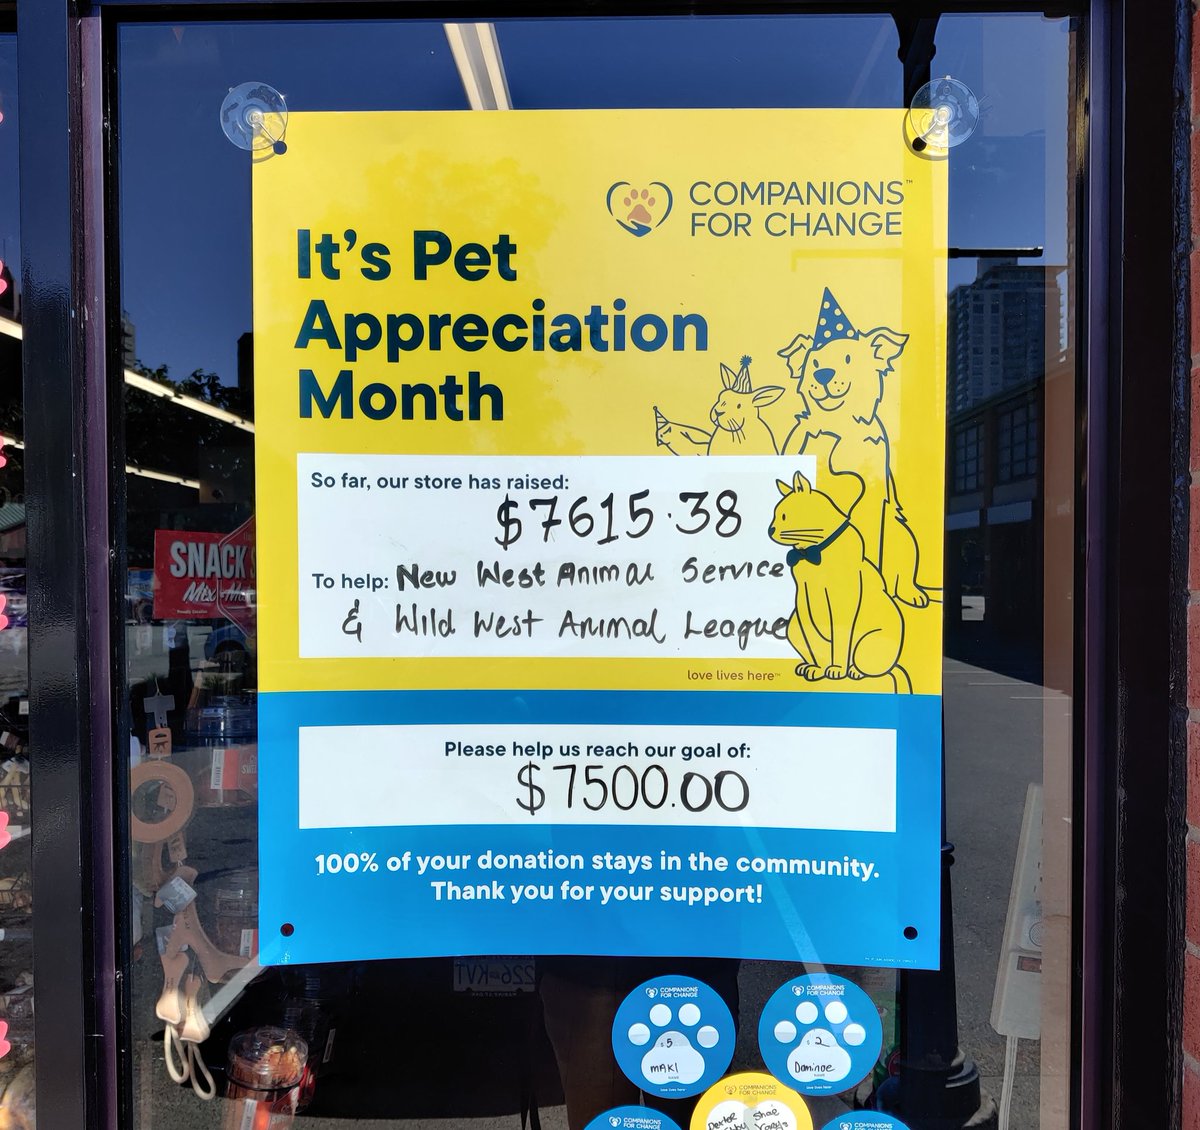 #PetAppreciationMonth was a success! We raised a total of $7615, exceeding our goal of $7000. 
Thank you for your generosity and support.💚
All donations will be going towards New West Animal Services  and Wild West Animal League.

#bosleys #loveliveshere #companionsforchange